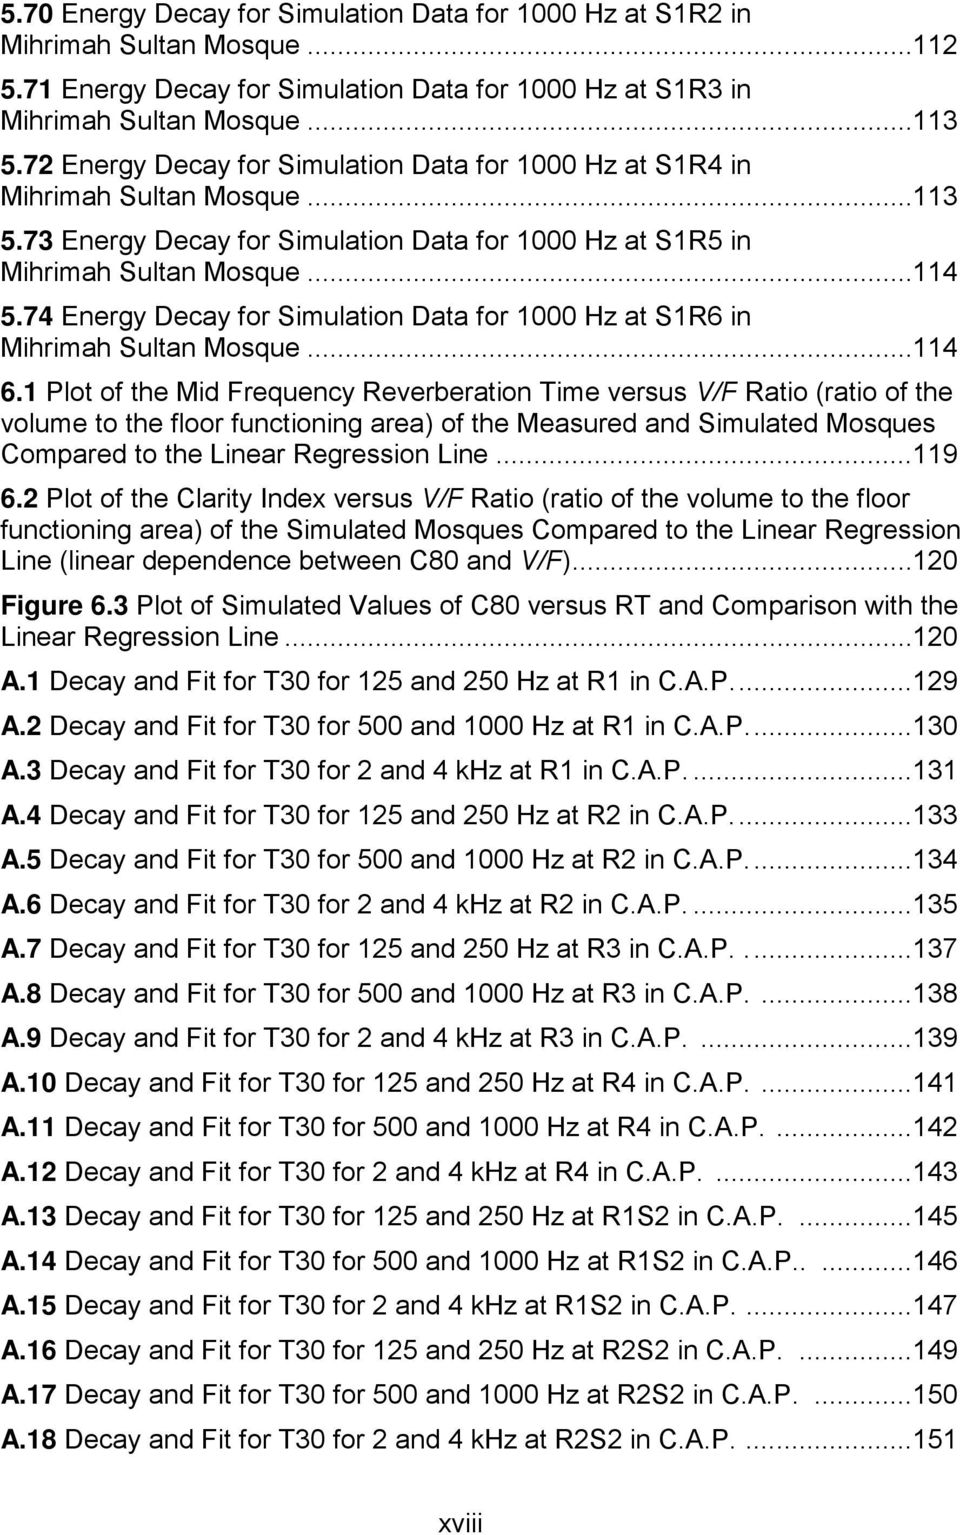 74 Energy Decay for Simulation Data for 1 Hz at S1R6 in Mihrimah Sultan Mosque...114 6.